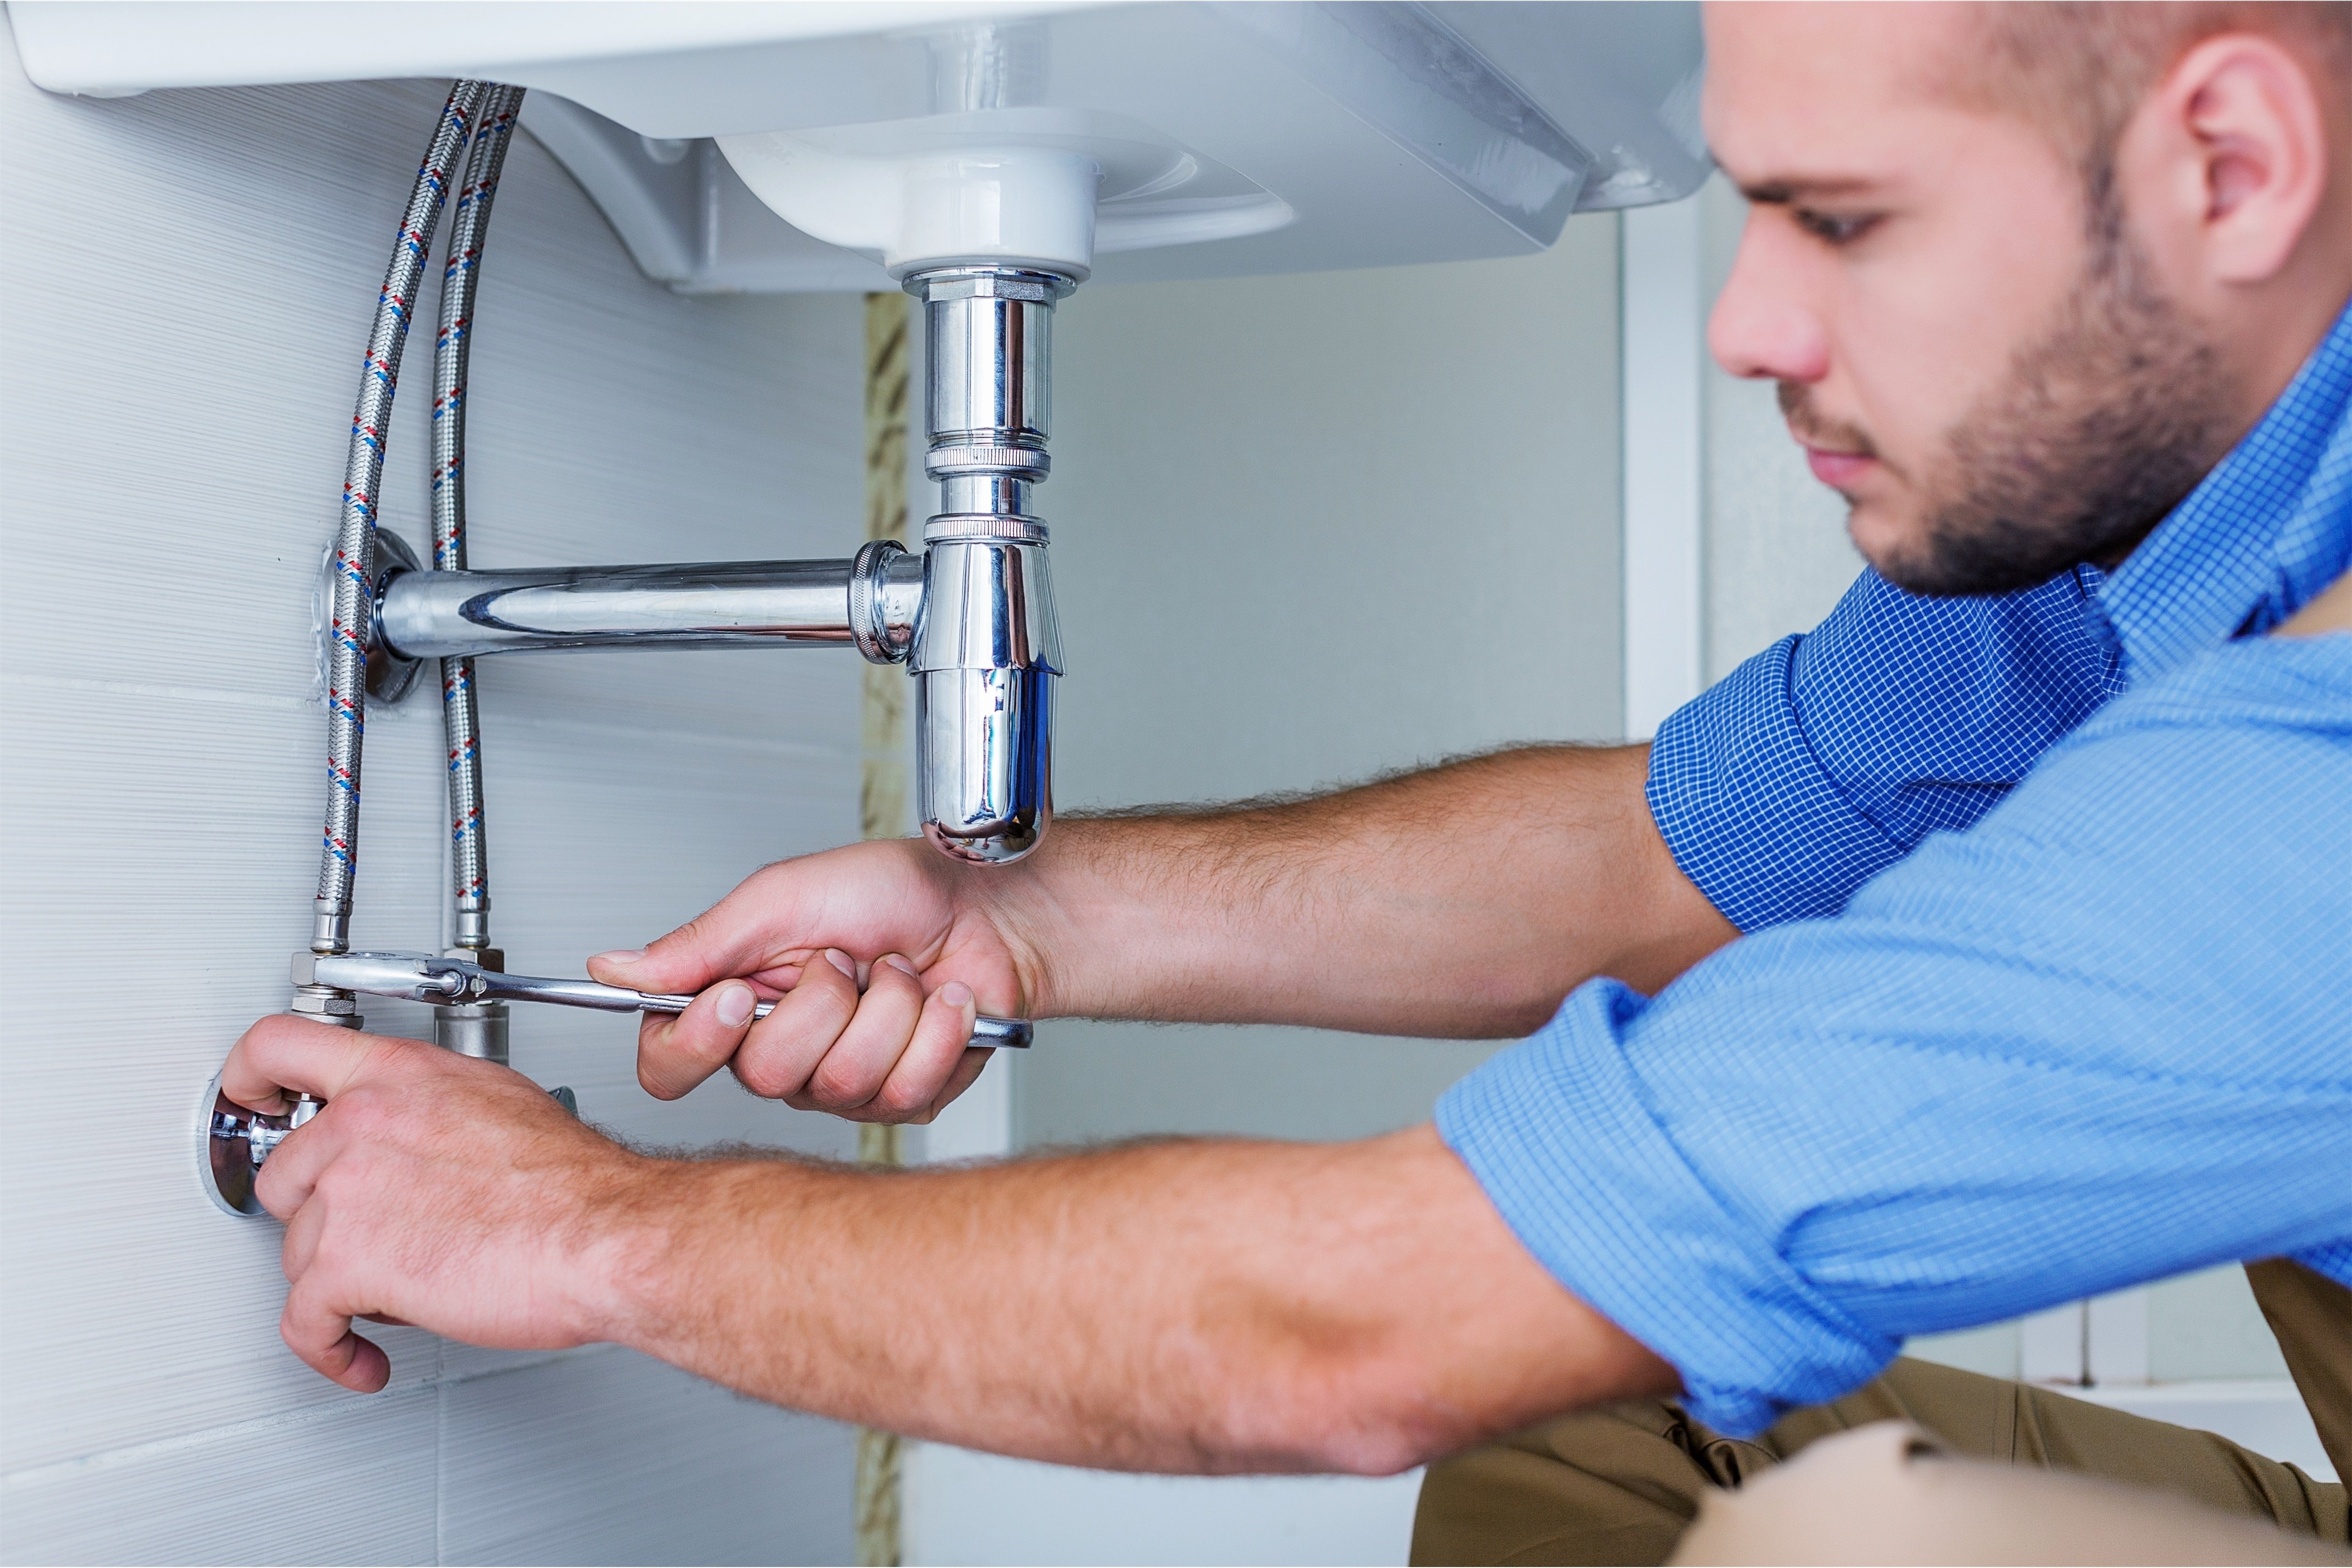 plumbing services being performed by a plumber